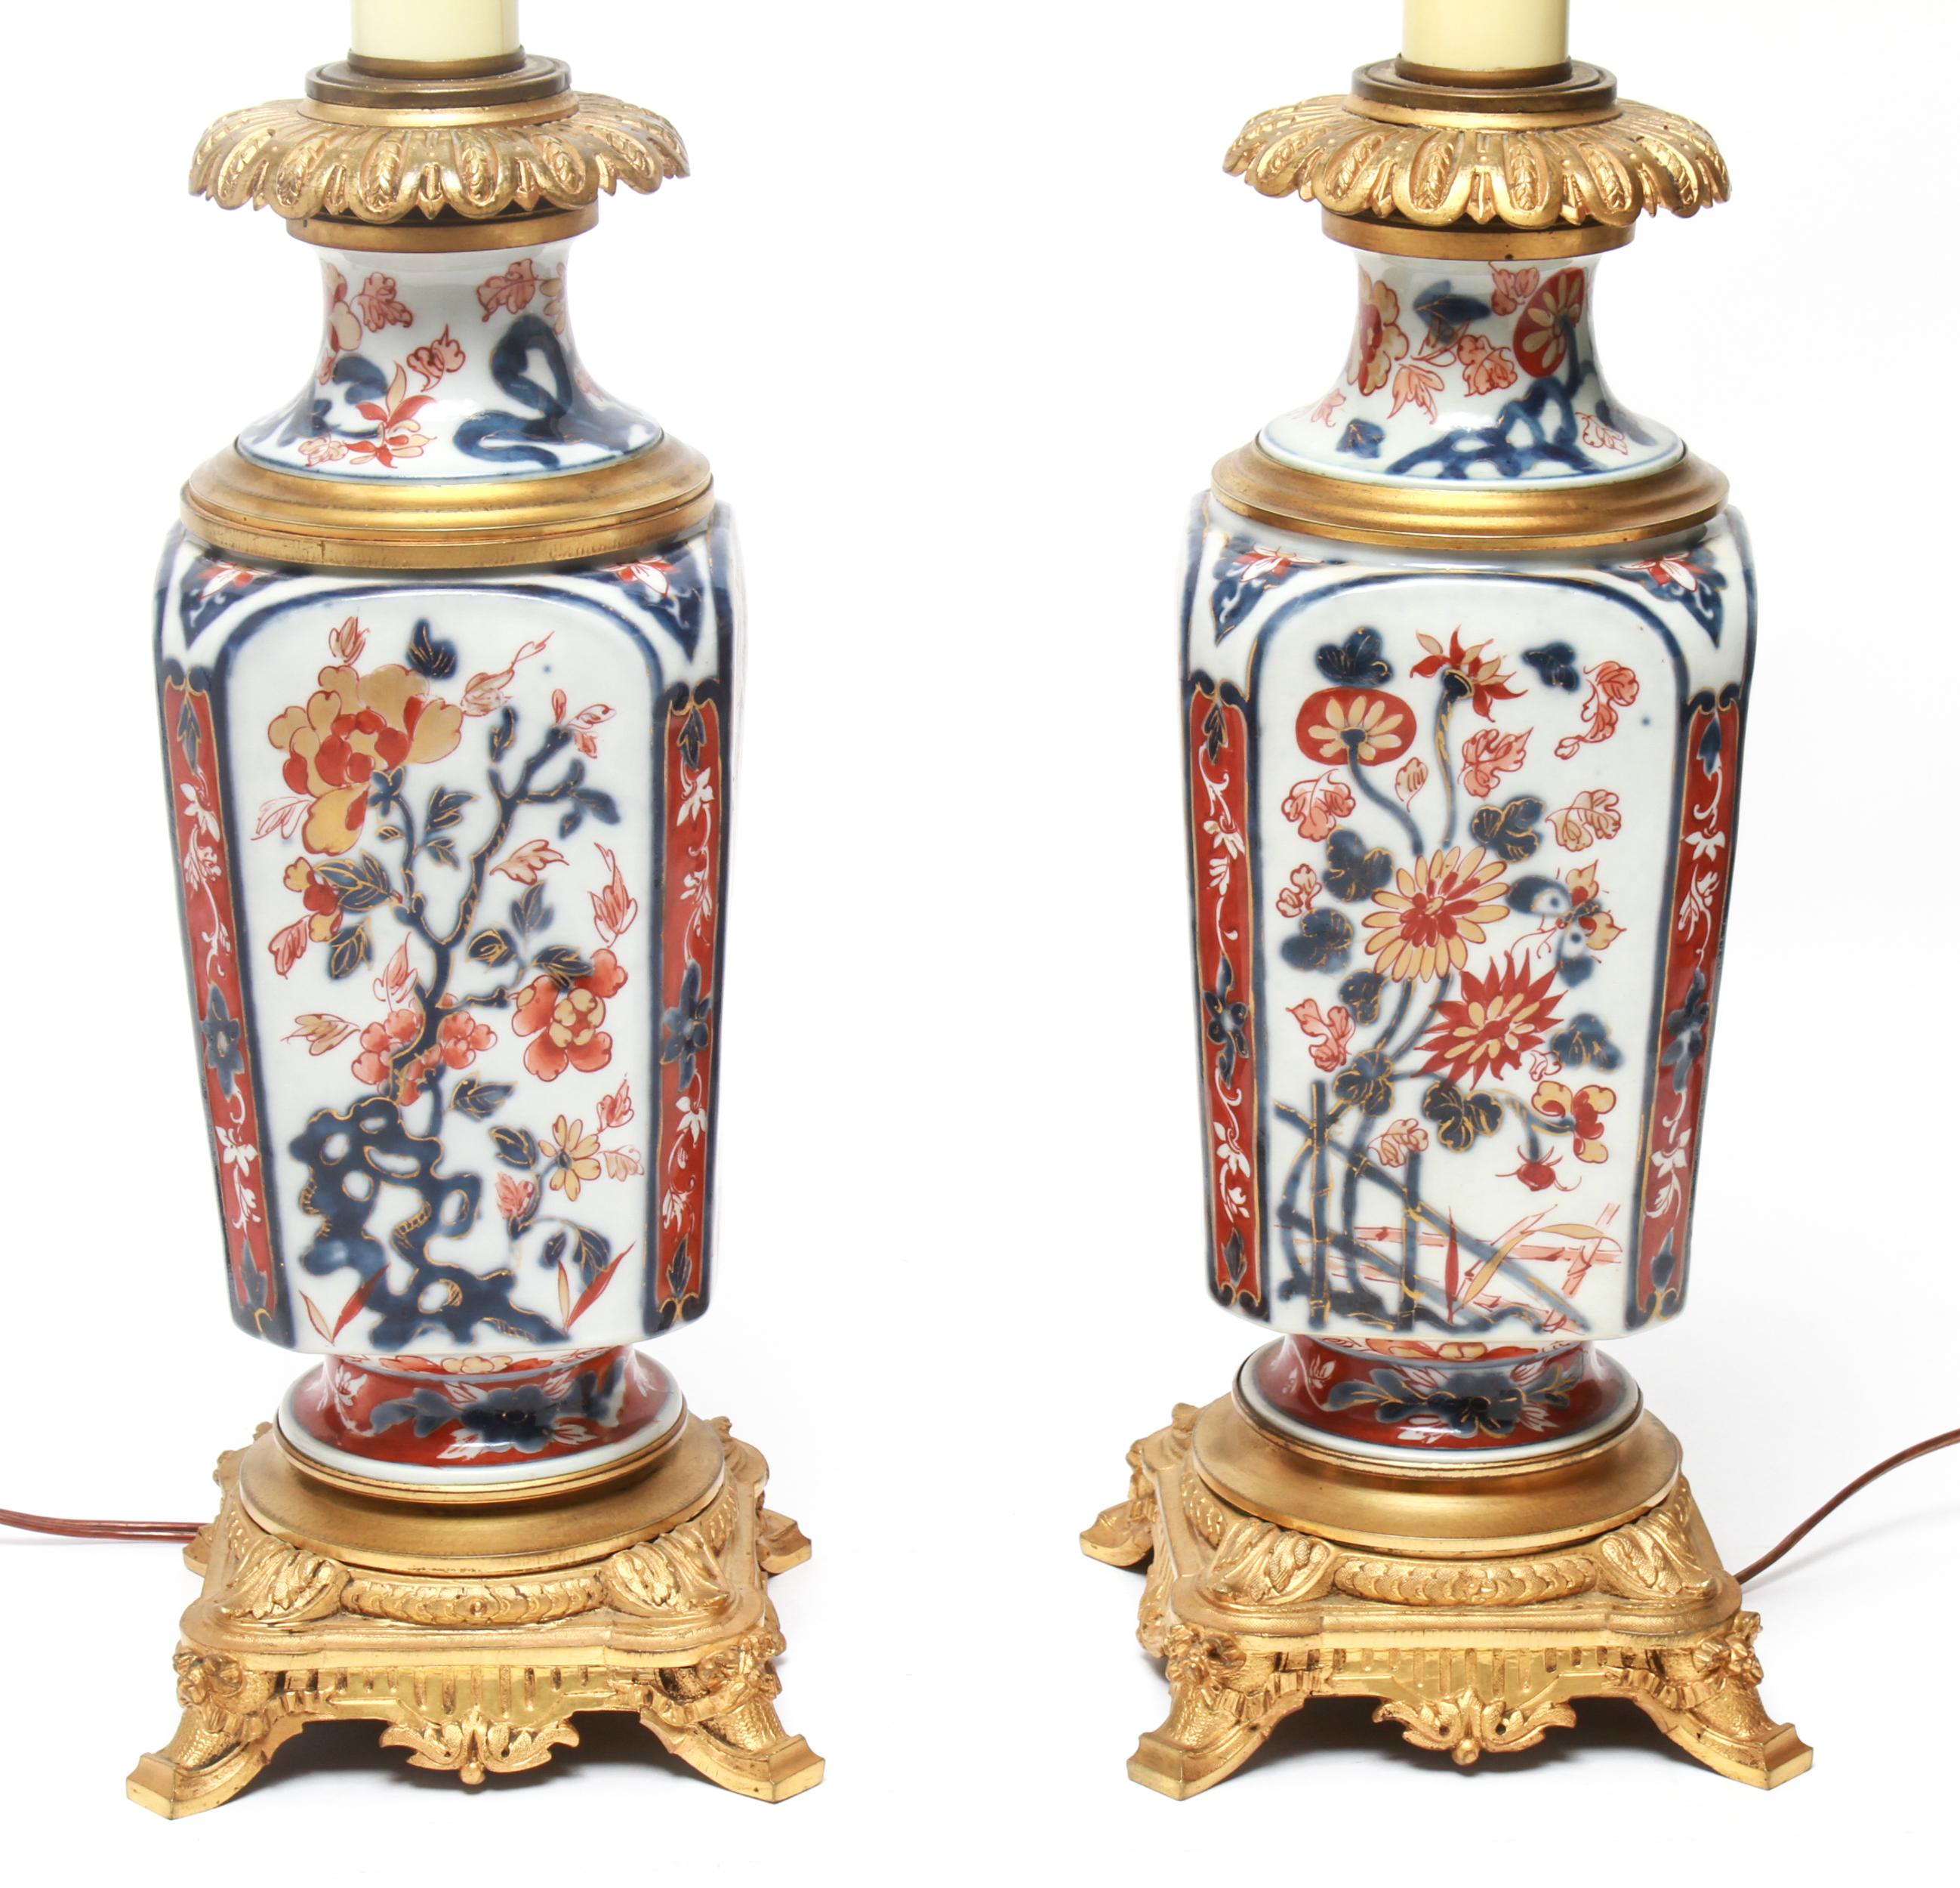 Japanese pair of Imari style porcelain table lamps, each featuring a scene with a phoenix above a vase of flowers and panels with floral designs. The pair sits on gilt brass mounts and has gilt brass collars. In great vintage condition with